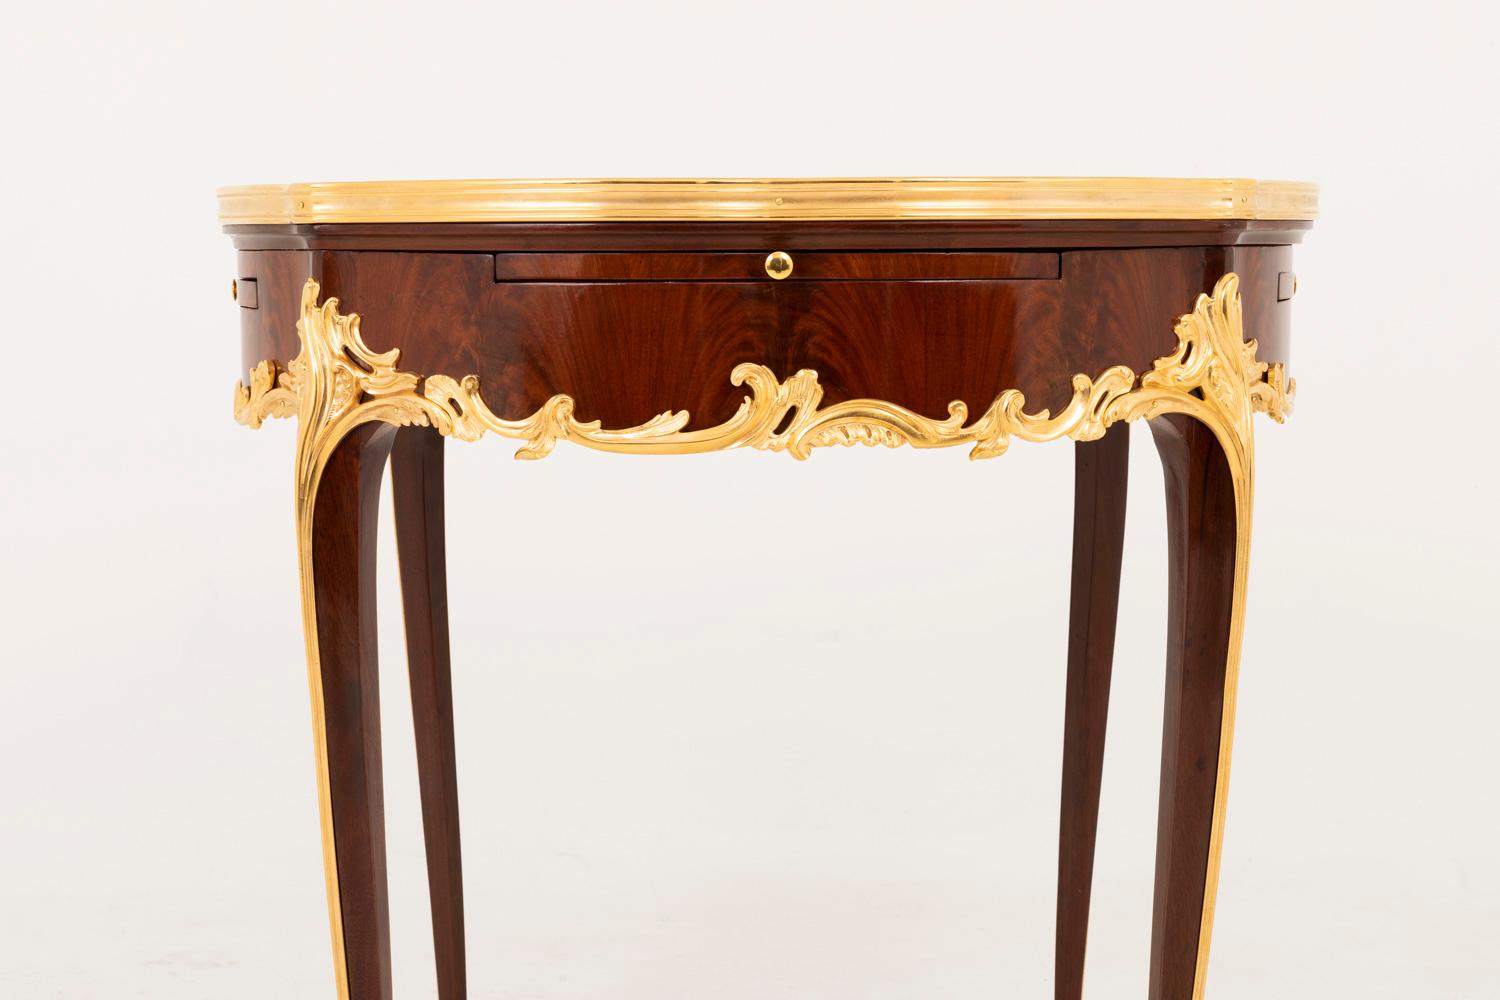 Circular Louis XV style bouillotte table in kingwood marquetry standing on four cabriole legs.
Four apron leaves with a curved frontal edge covered with brown leather hit with gilt irons with a decor of foliage scrolls and opening by a small gilt